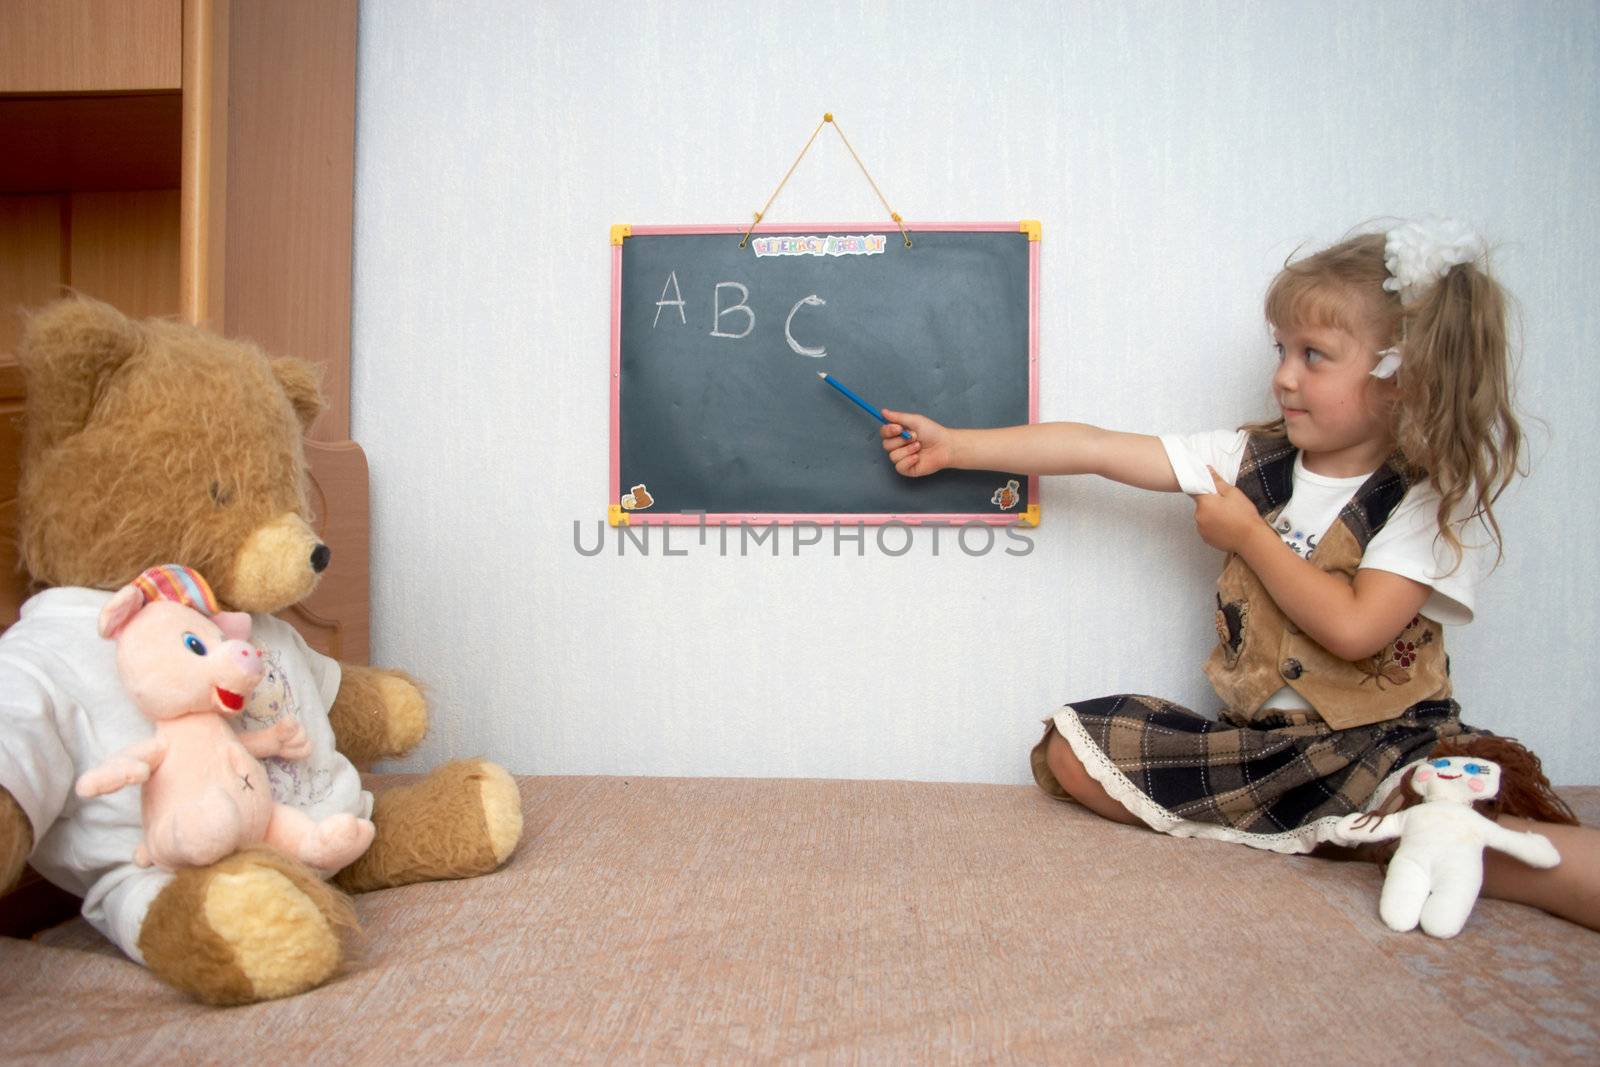 An image of girl with toys and school alackboard